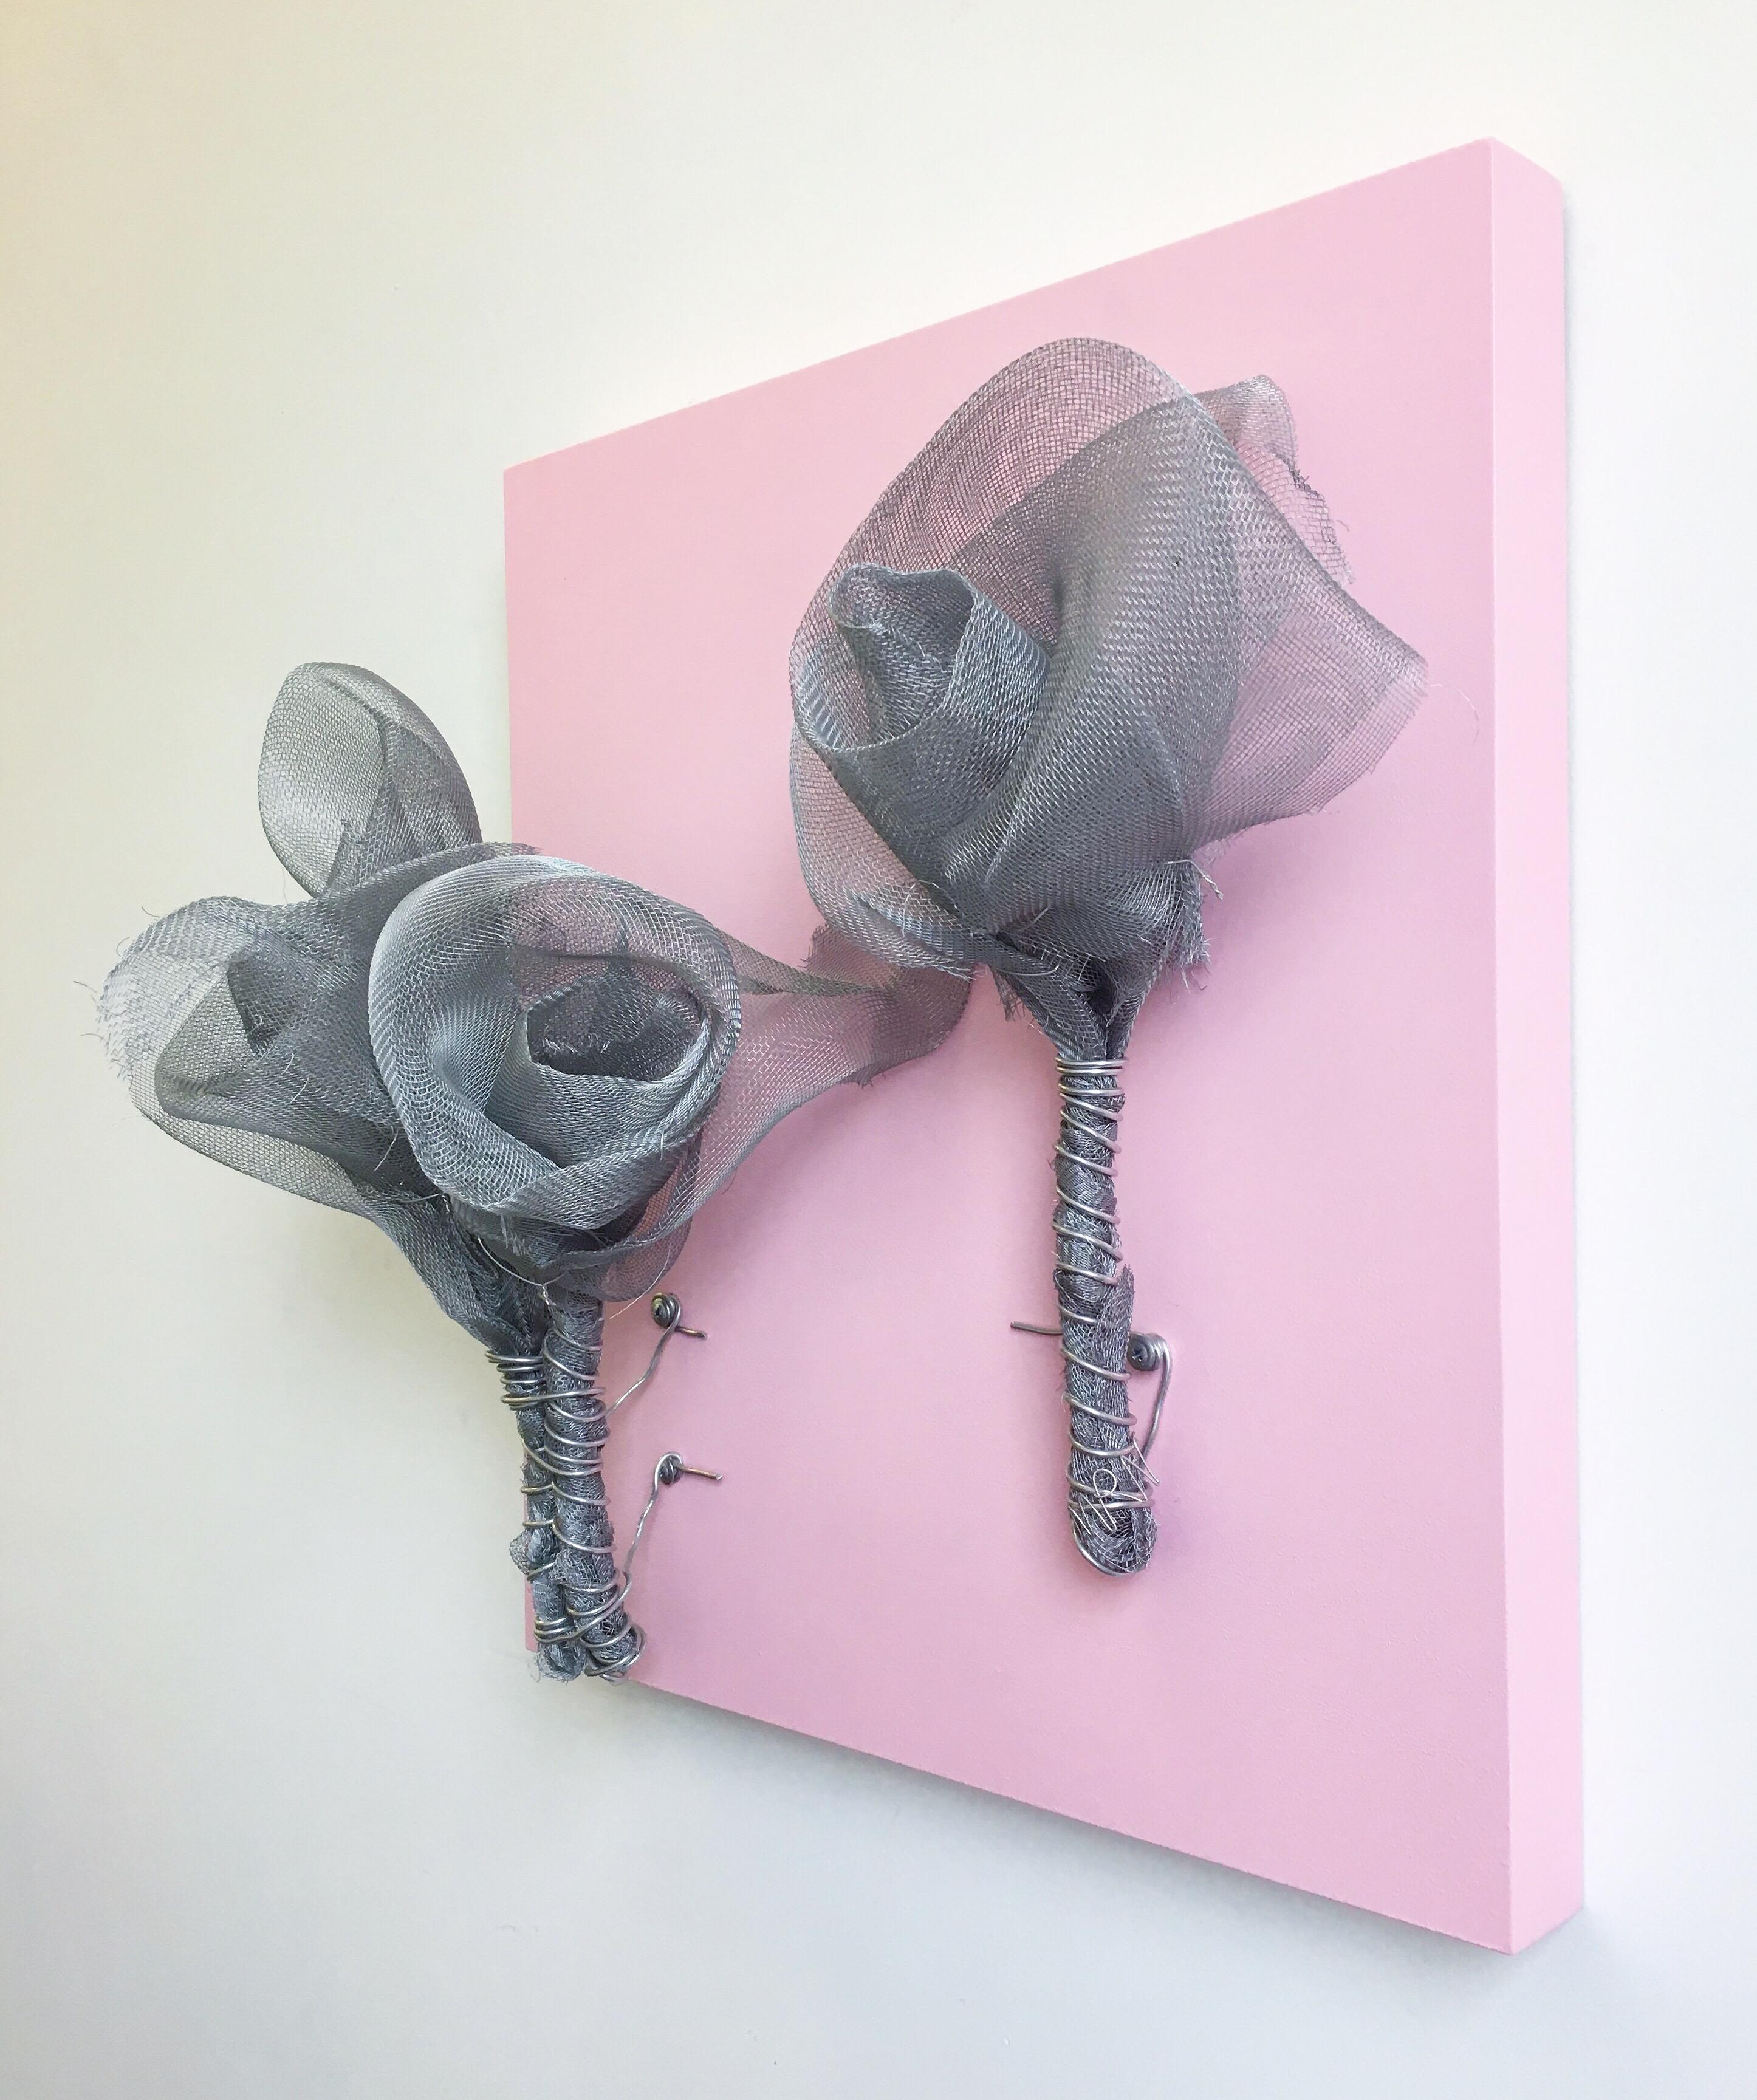 ROSES (pink) PASSION sculpture 19